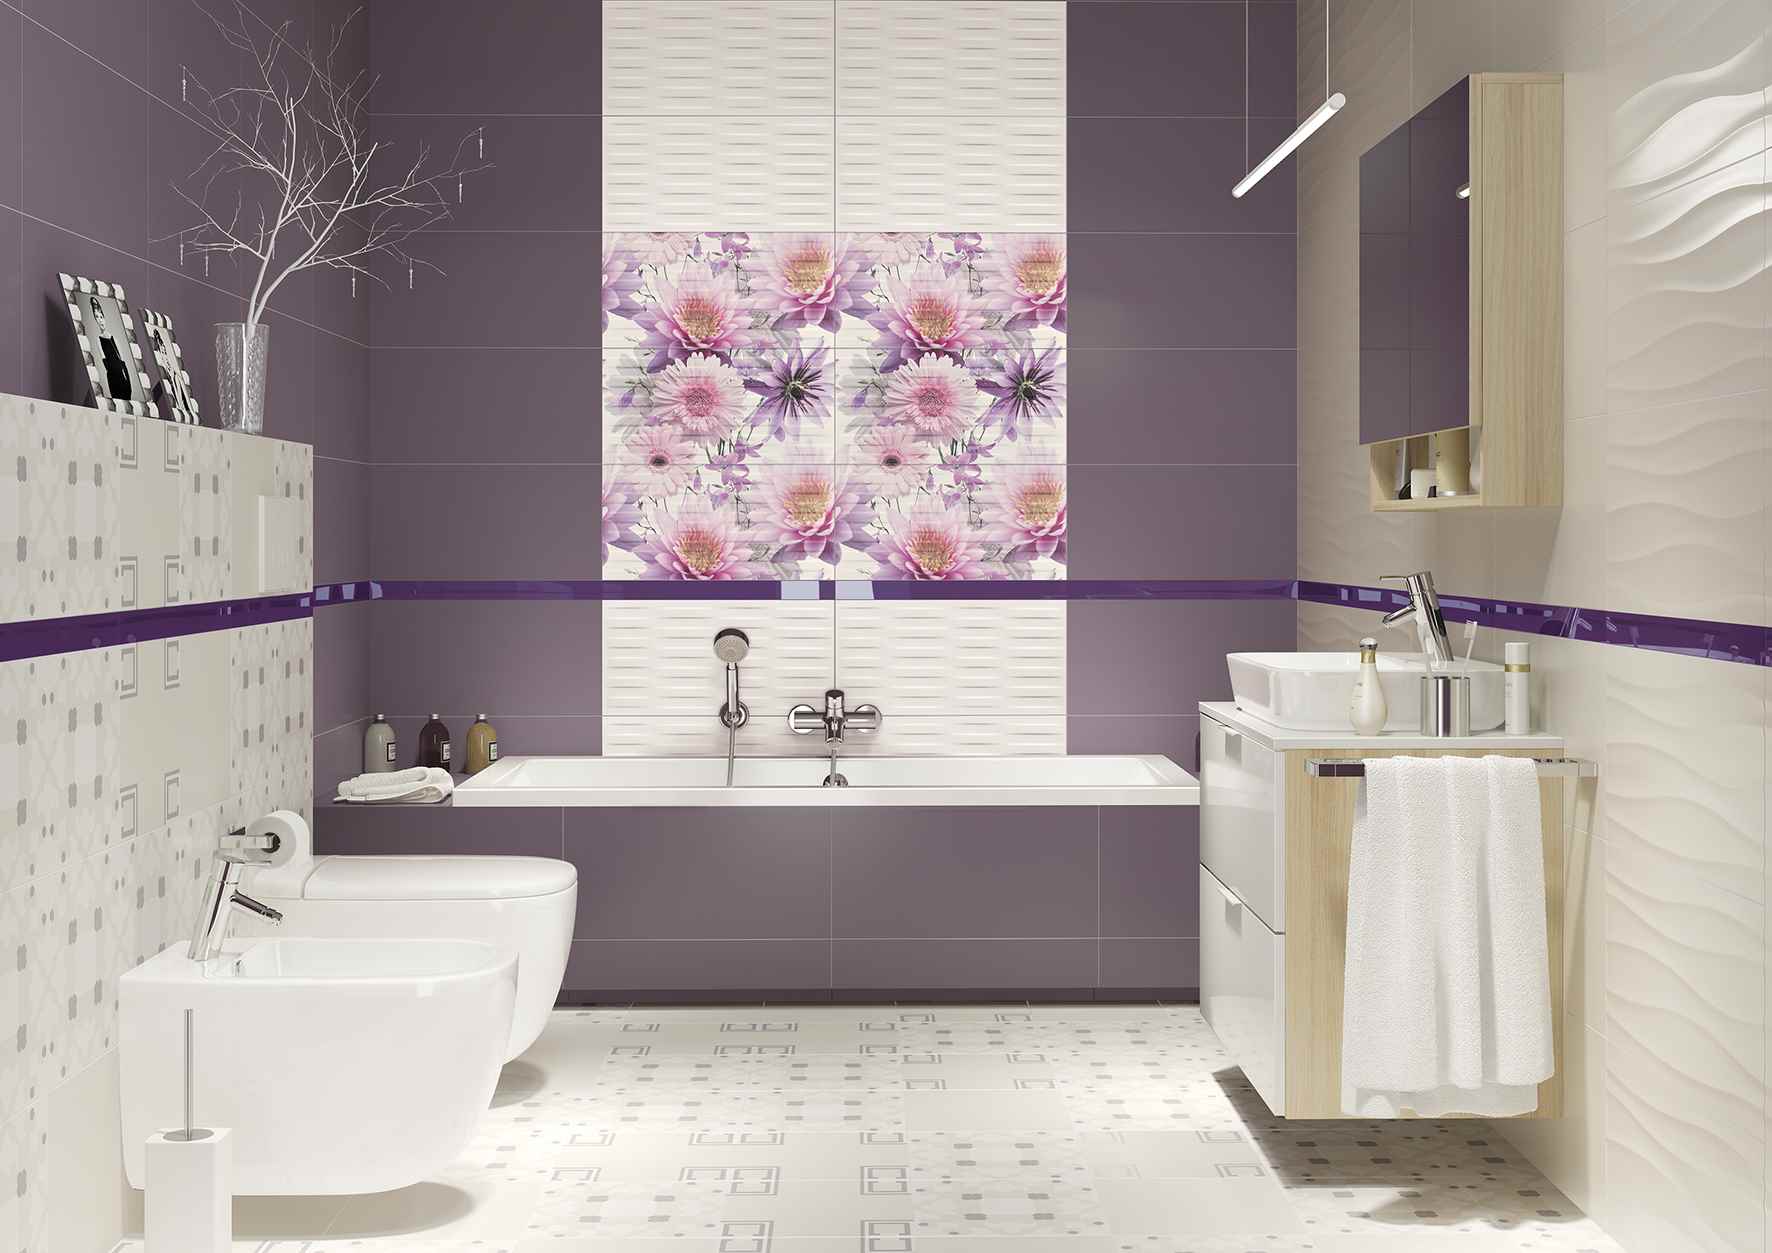 option of a beautiful decor for laying tiles in the bathroom